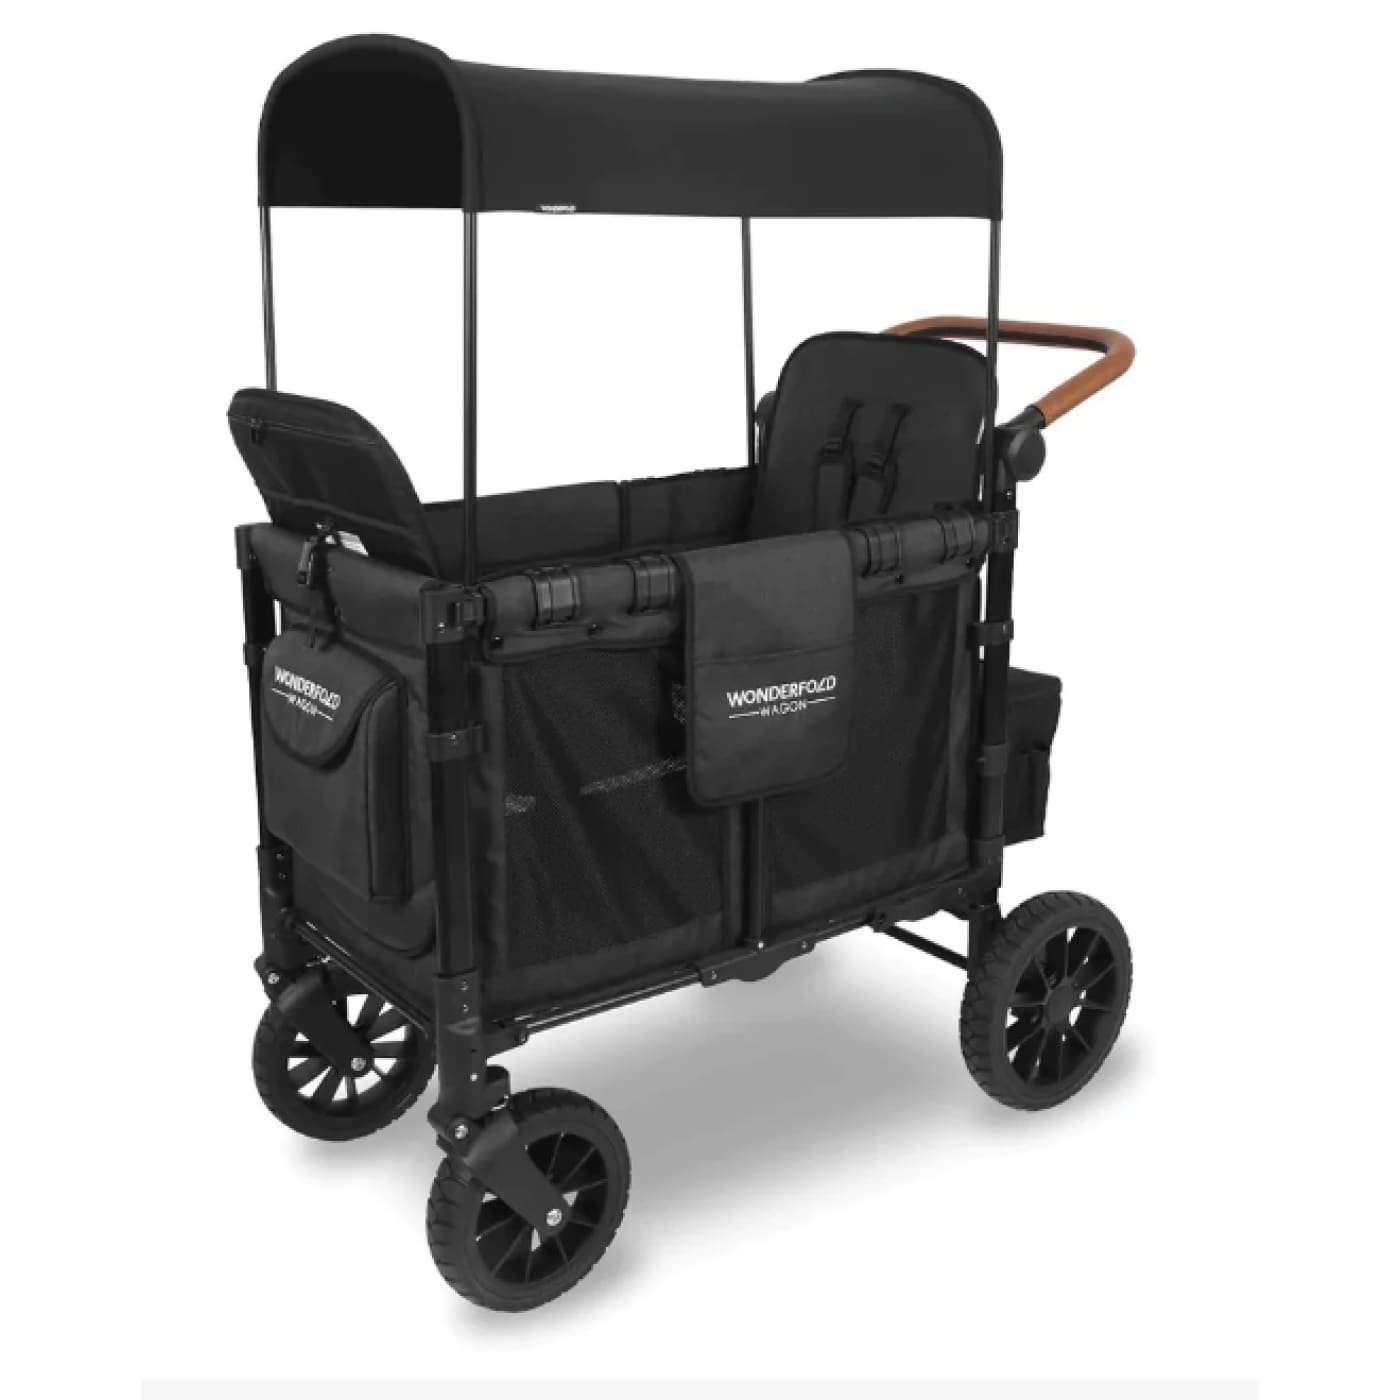 Wonderfold W2 Luxe Double Wagon - Volcanic Black - PRAMS & STROLLERS - WAGONS